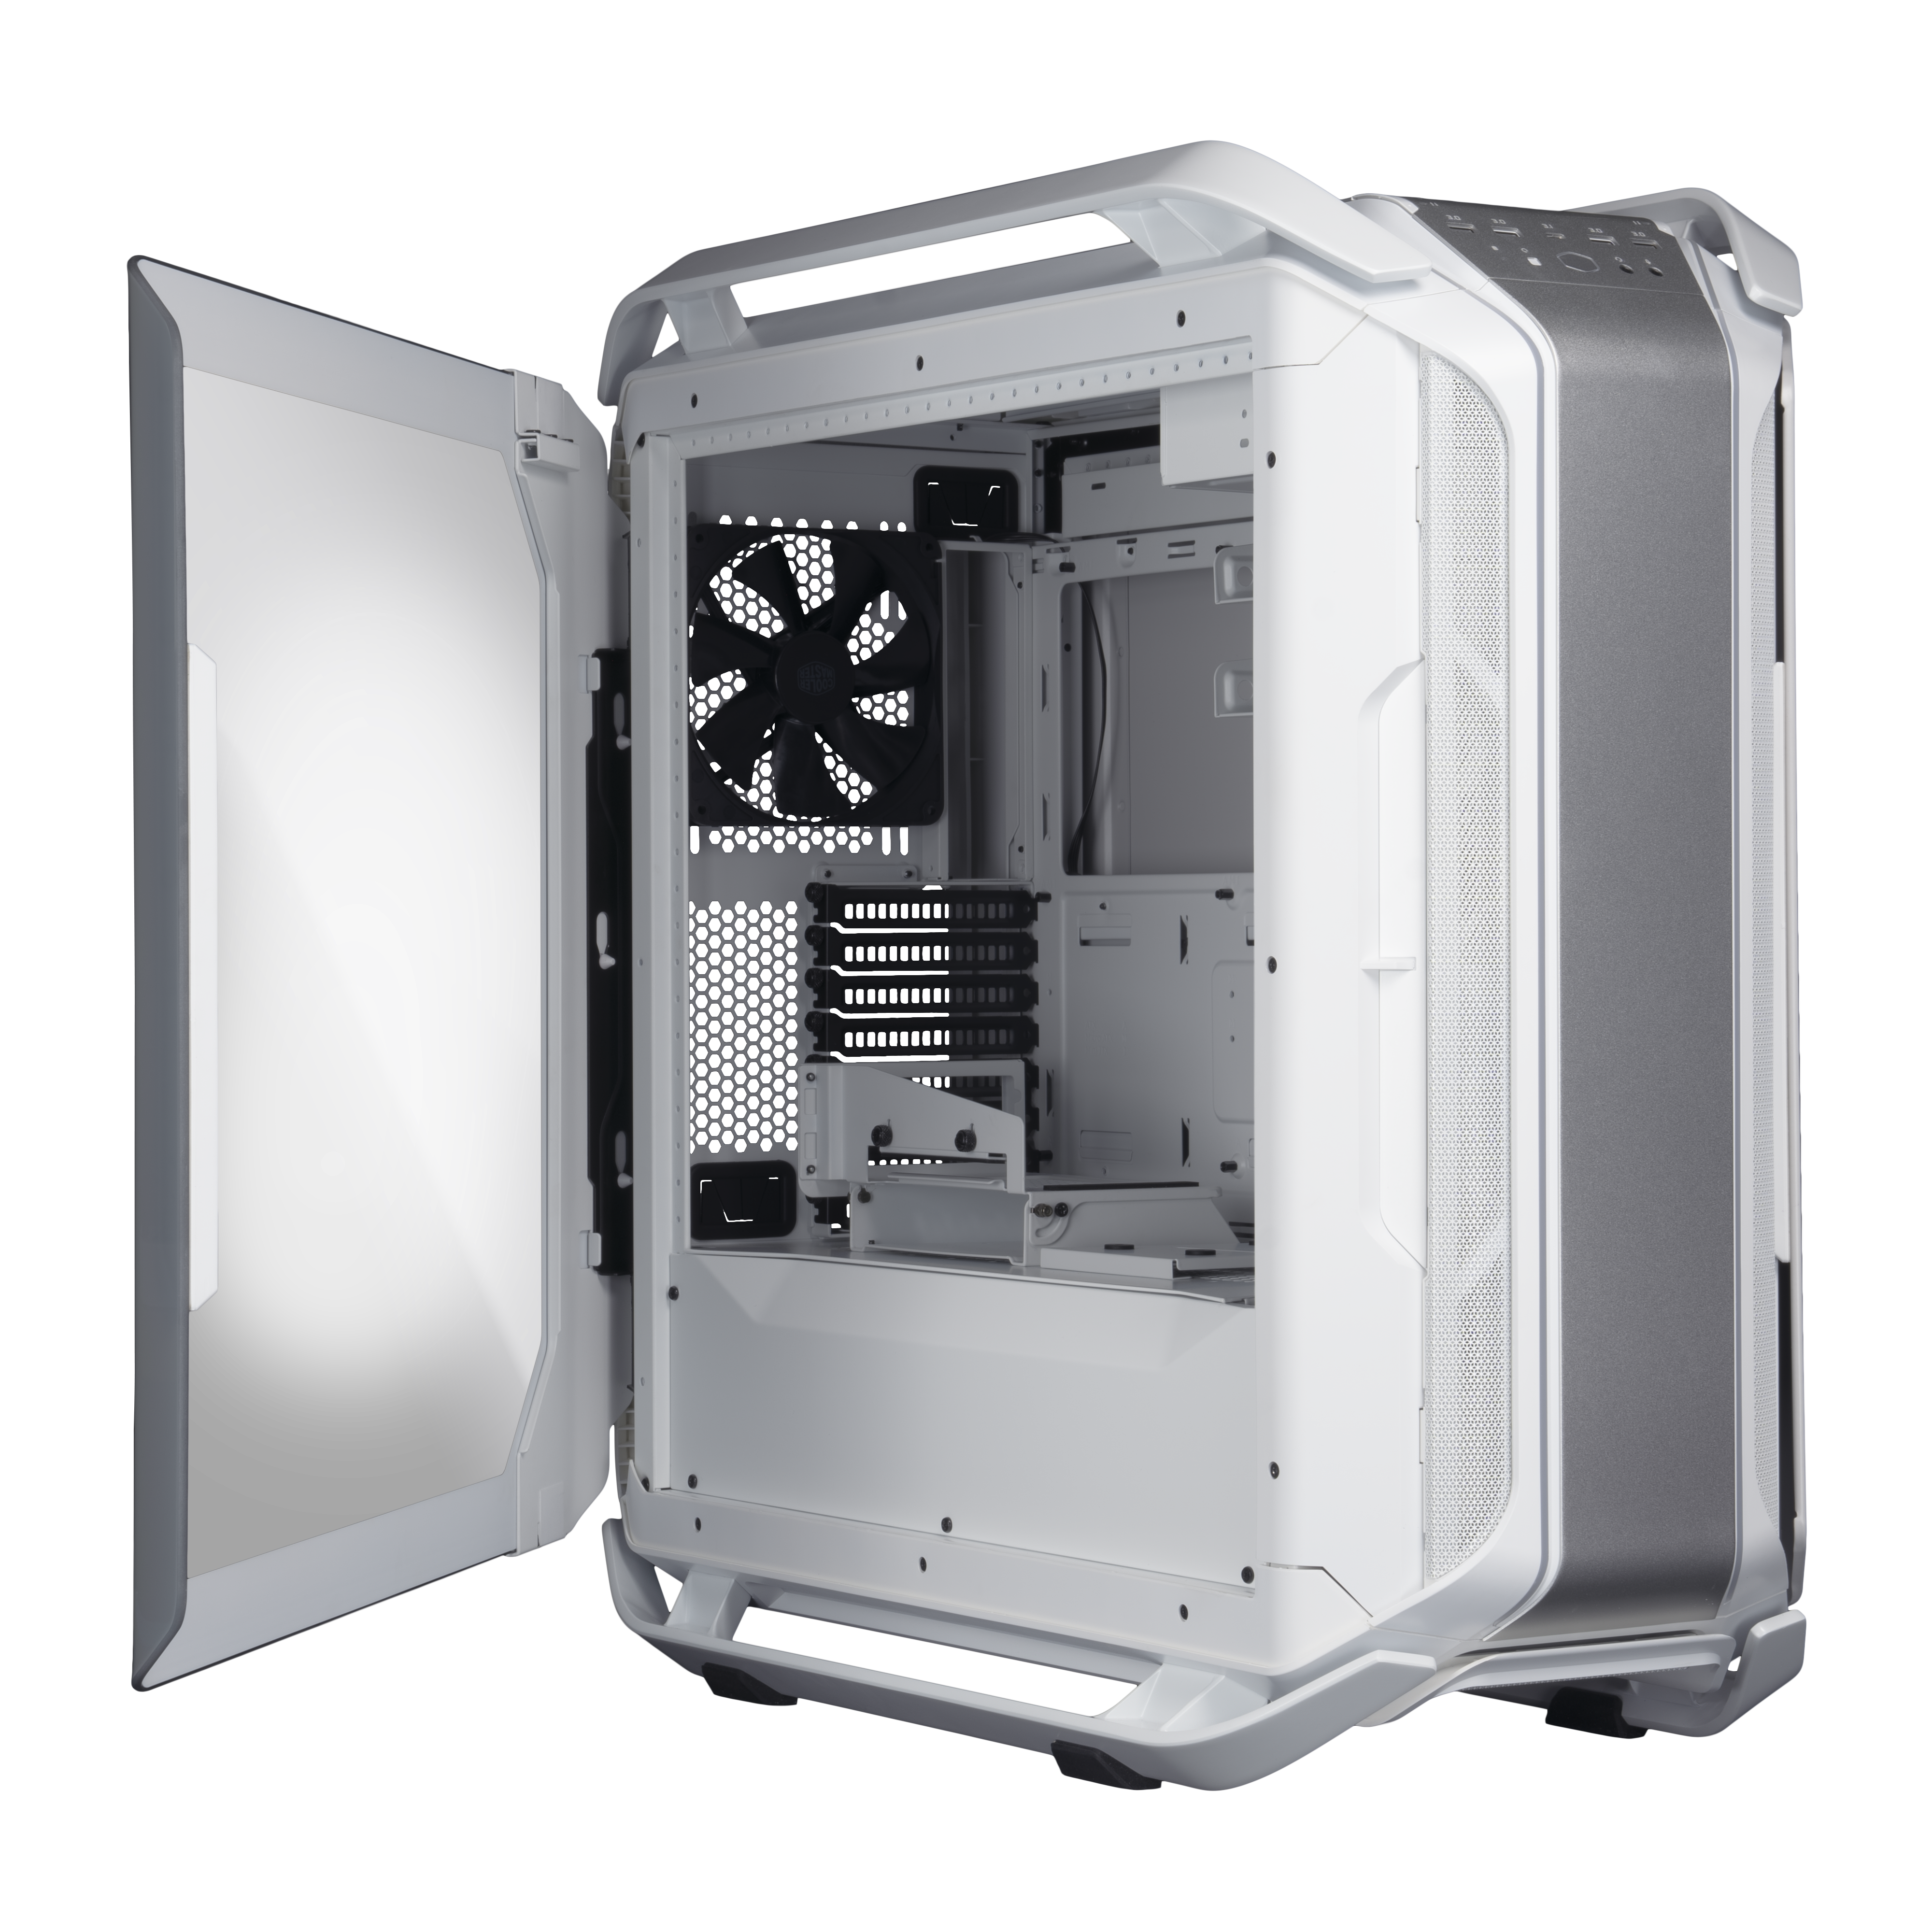 COSMOS C700M Full Tower PC Case | Cooler Master USA